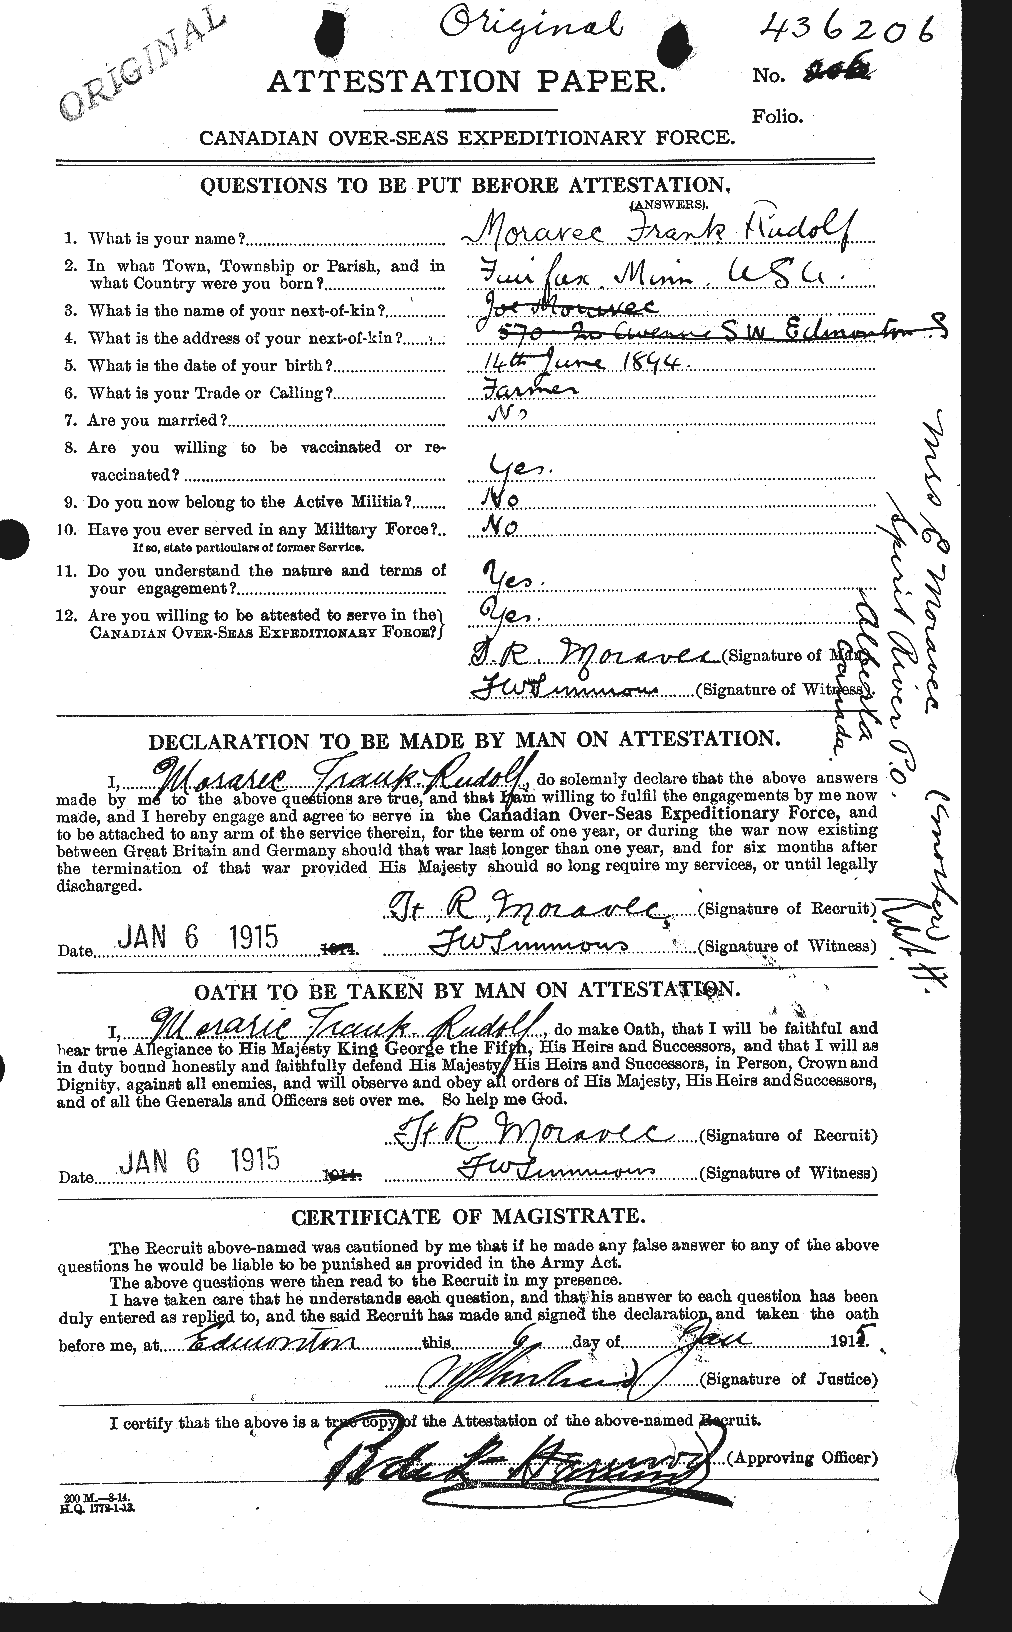 Personnel Records of the First World War - CEF 503691a